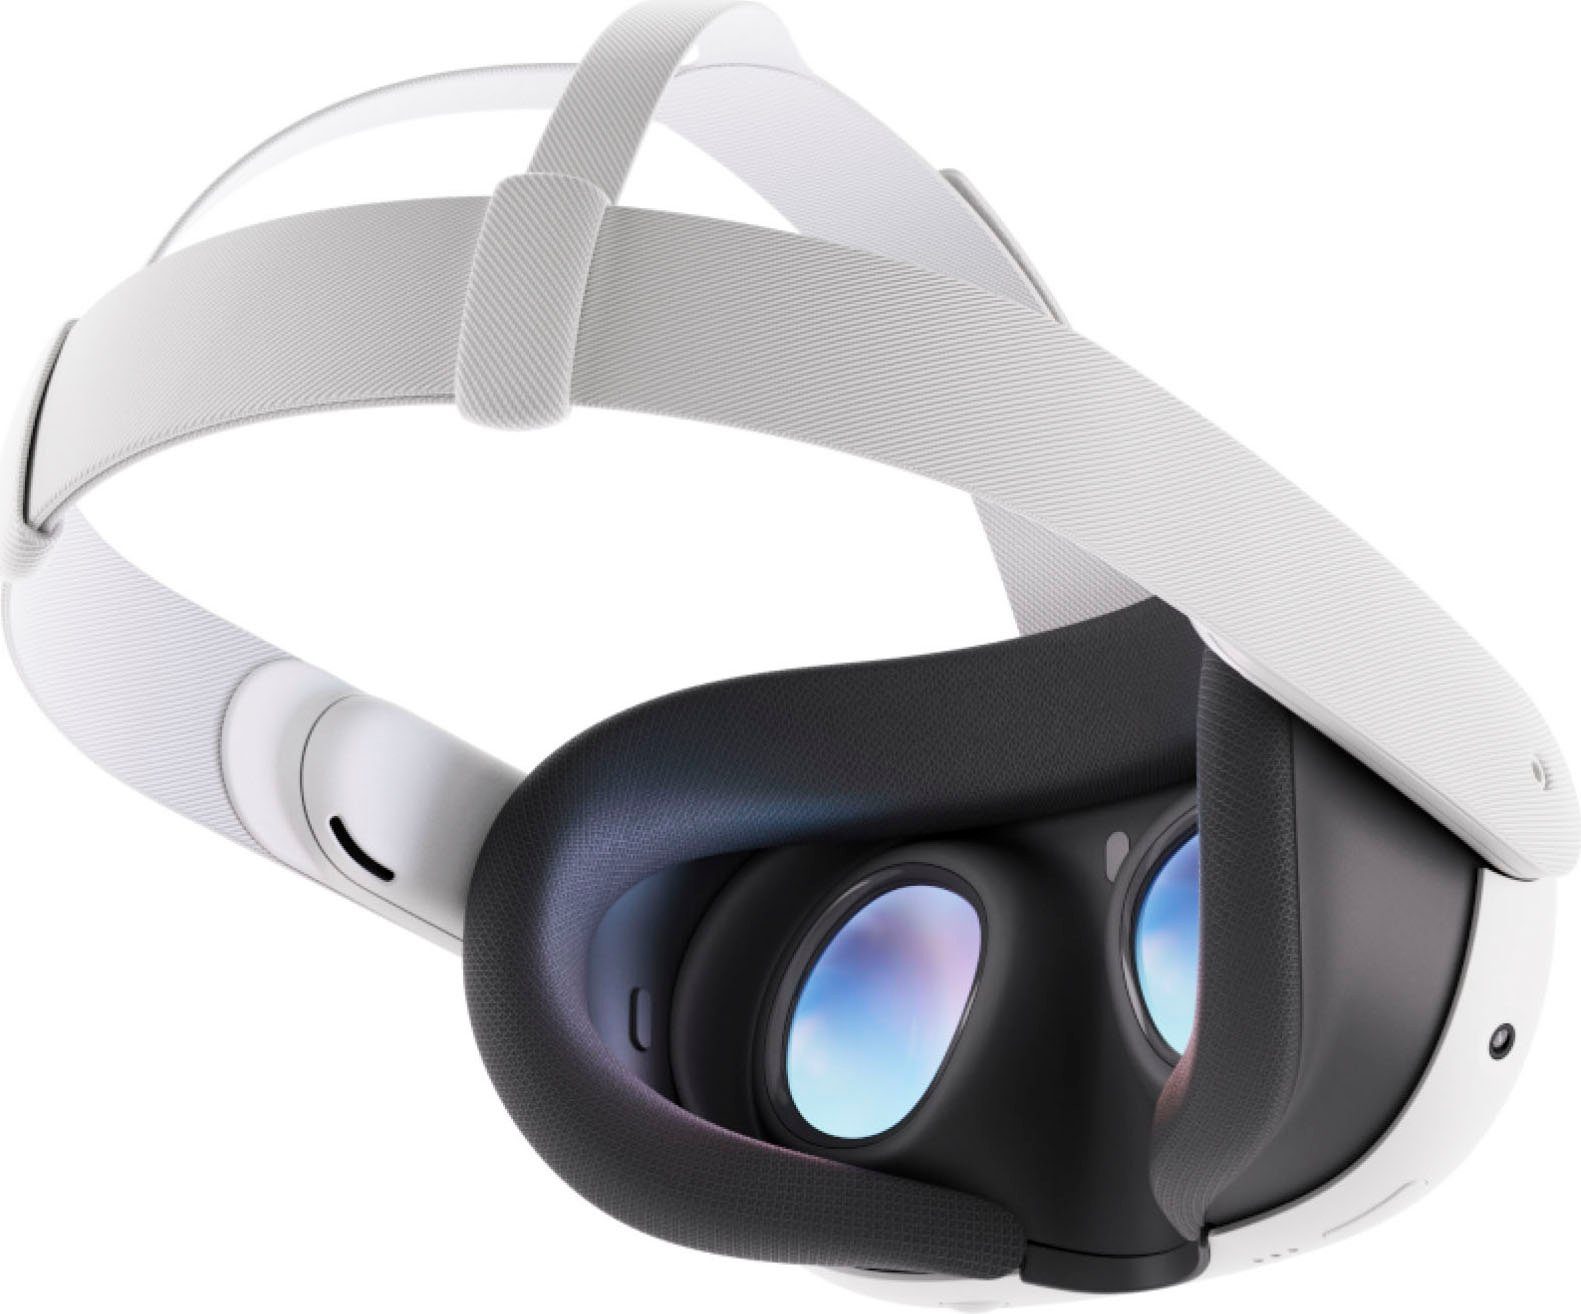 120 Virtual-Reality-Brille Hz, (4128 128 LCD) Quest Quest Meta 3 px, GB x 2208